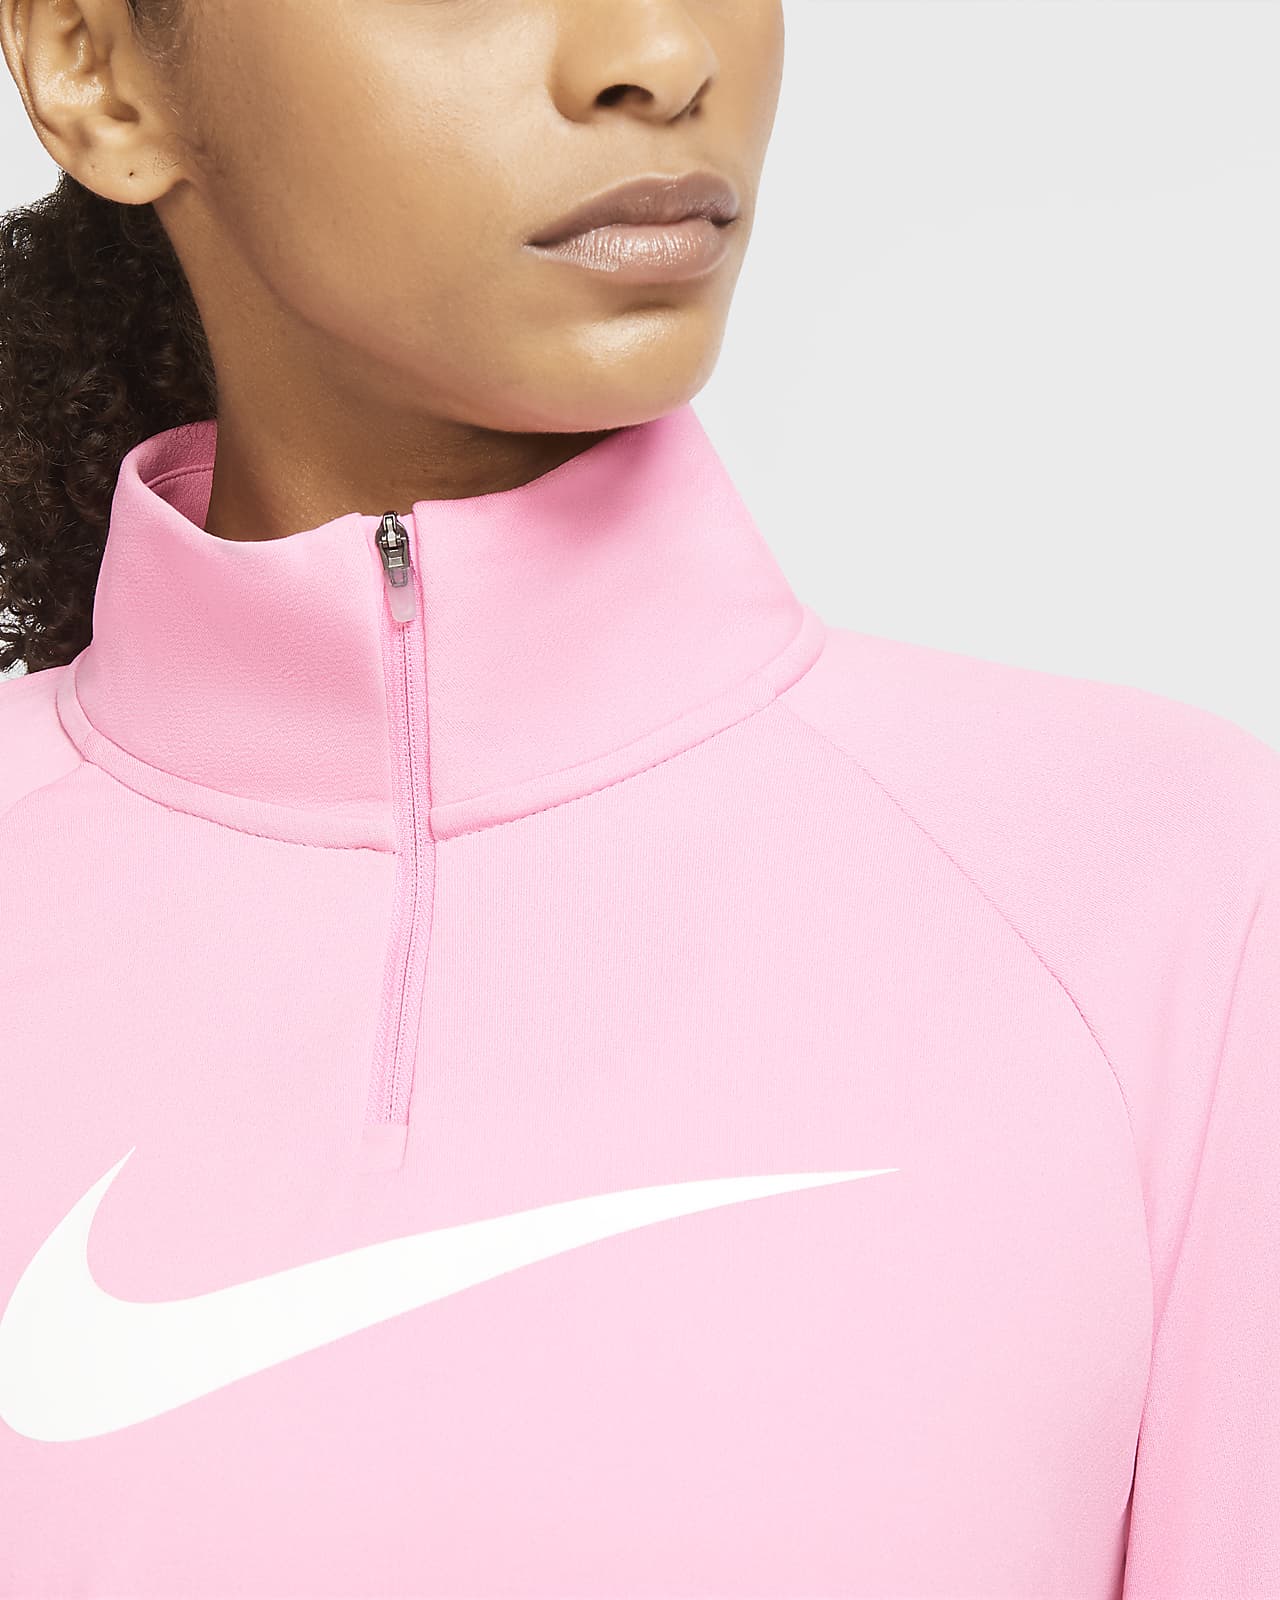 bright pink nike top